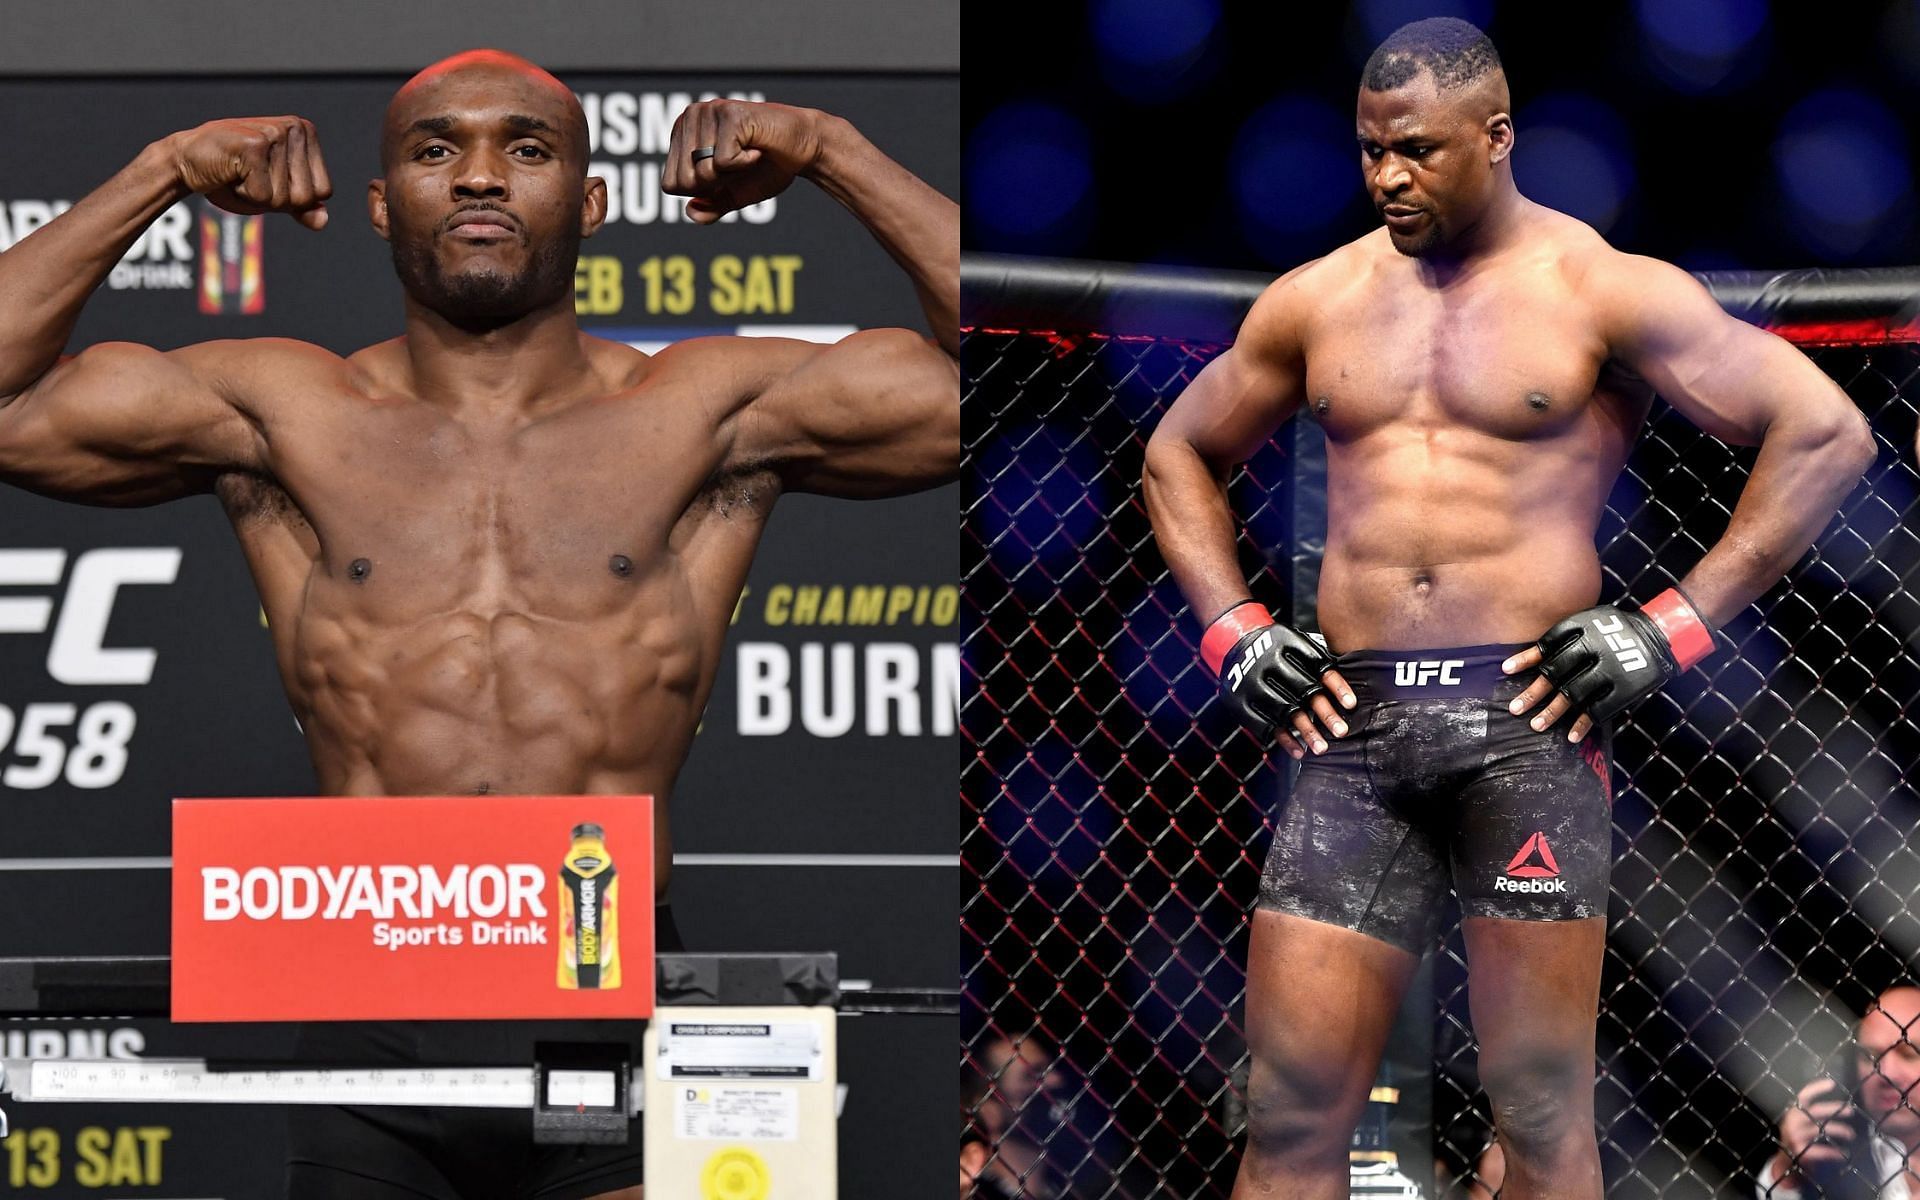 Kamaru Usman speaks about how sorry he felt for Francis Ngannou after the interim UFC heavyweight title was created